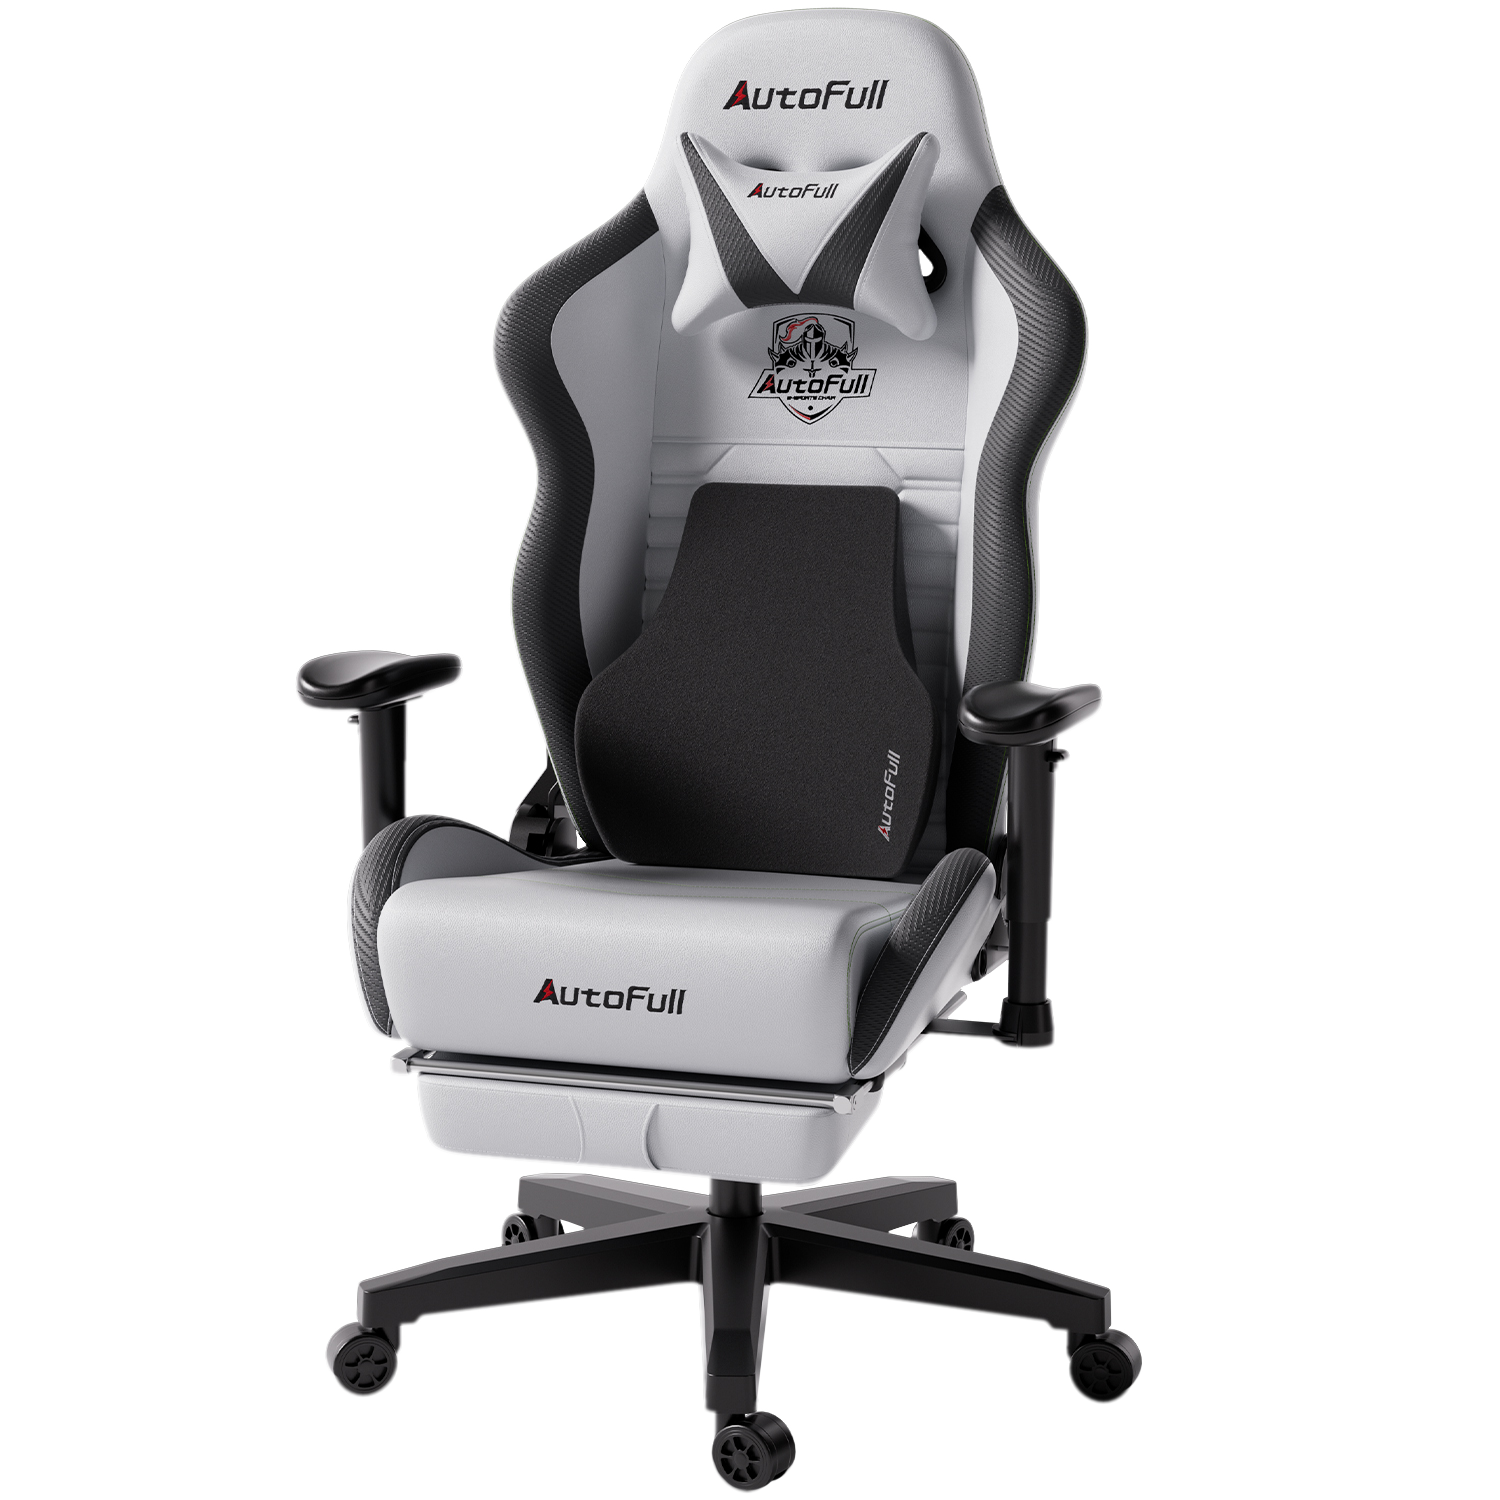 AutoFull C3 Gaming Chair, Gray Color